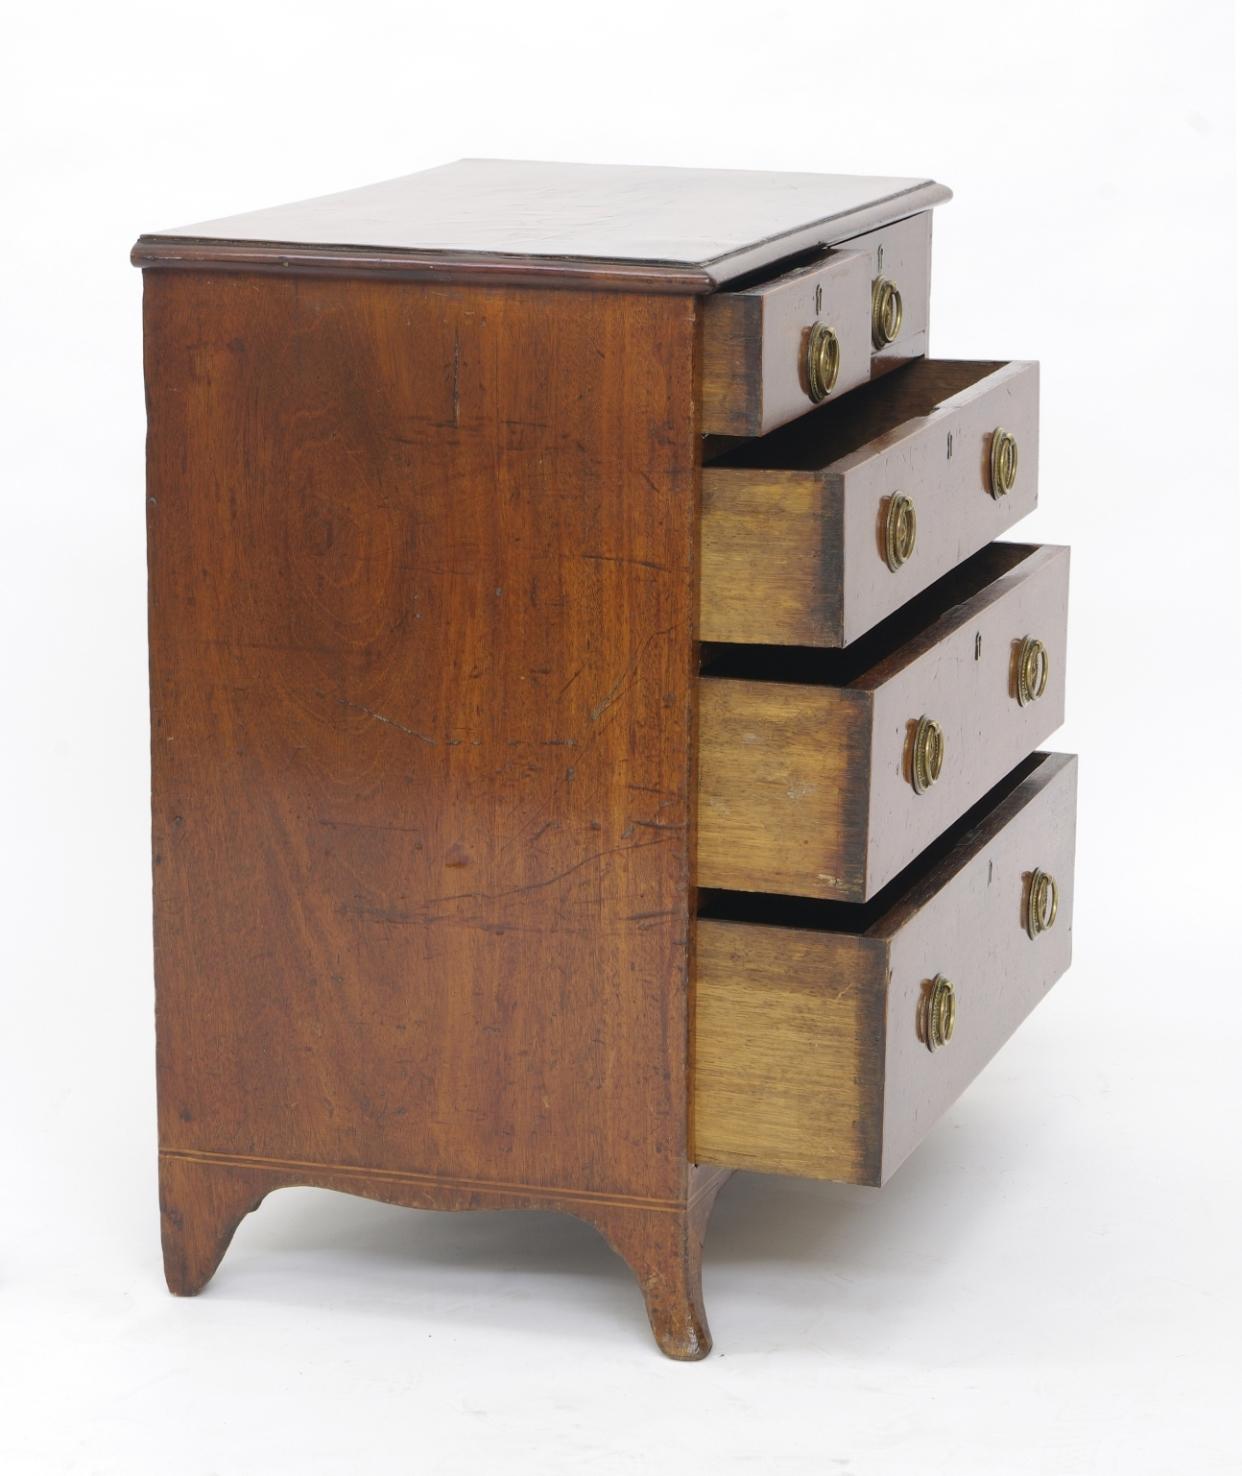 Late 18th Century George III Fiddleback Mahogany Small Chest of Drawers, circa 1790